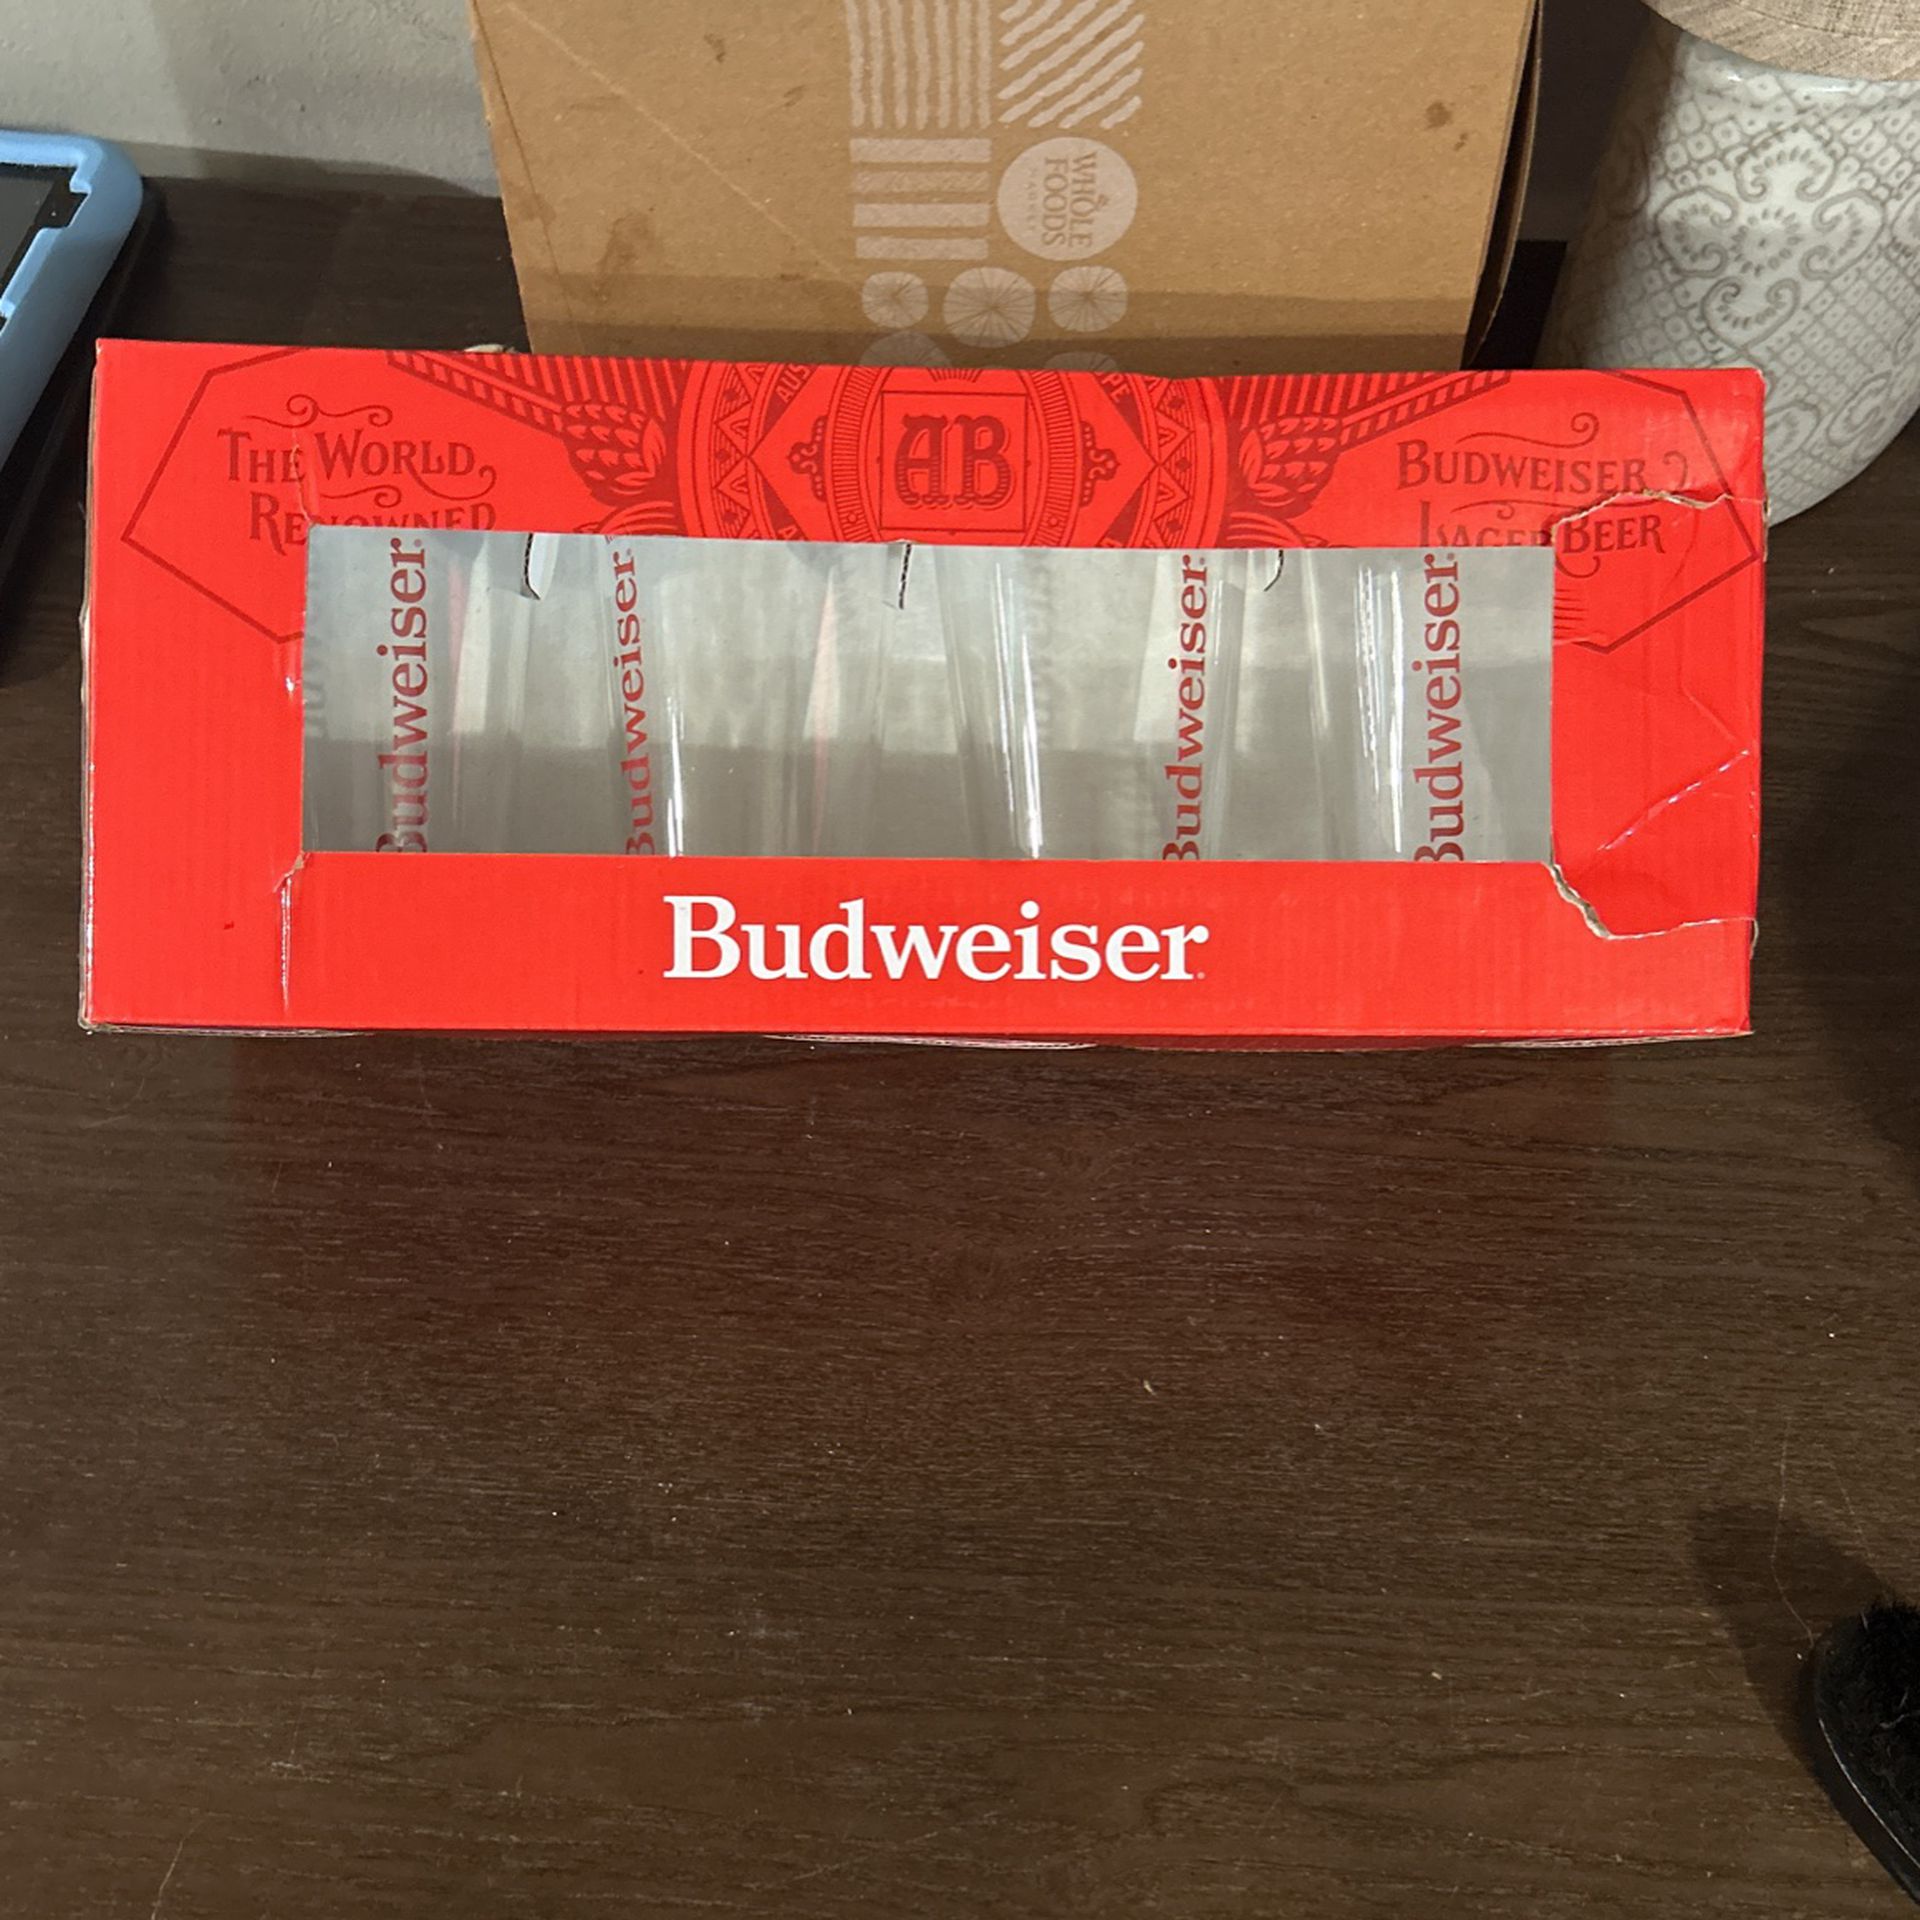 BUDWEISER 4PC GLASS SET CLEAR GLASSES